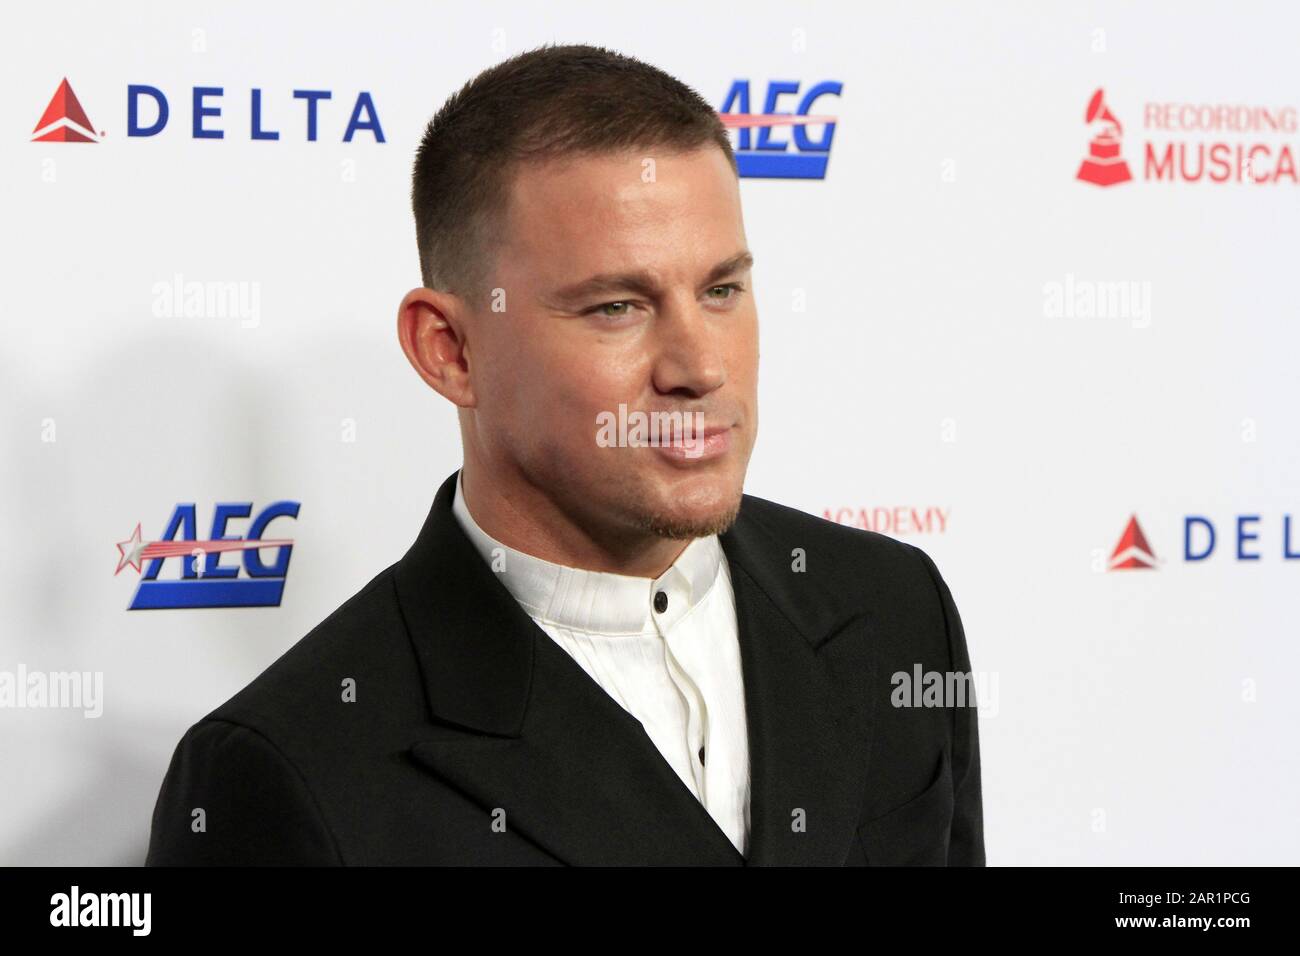 January 24, 2020, Los Angeles, CA, USA: LOS ANGELES - JAN 24:  Channing Tatum at the 2020 Muiscares at the Los Angeles Convention Center on January 24, 2020 in Los Angeles, CA (Credit Image: © Kay Blake/ZUMA Wire) Stock Photo